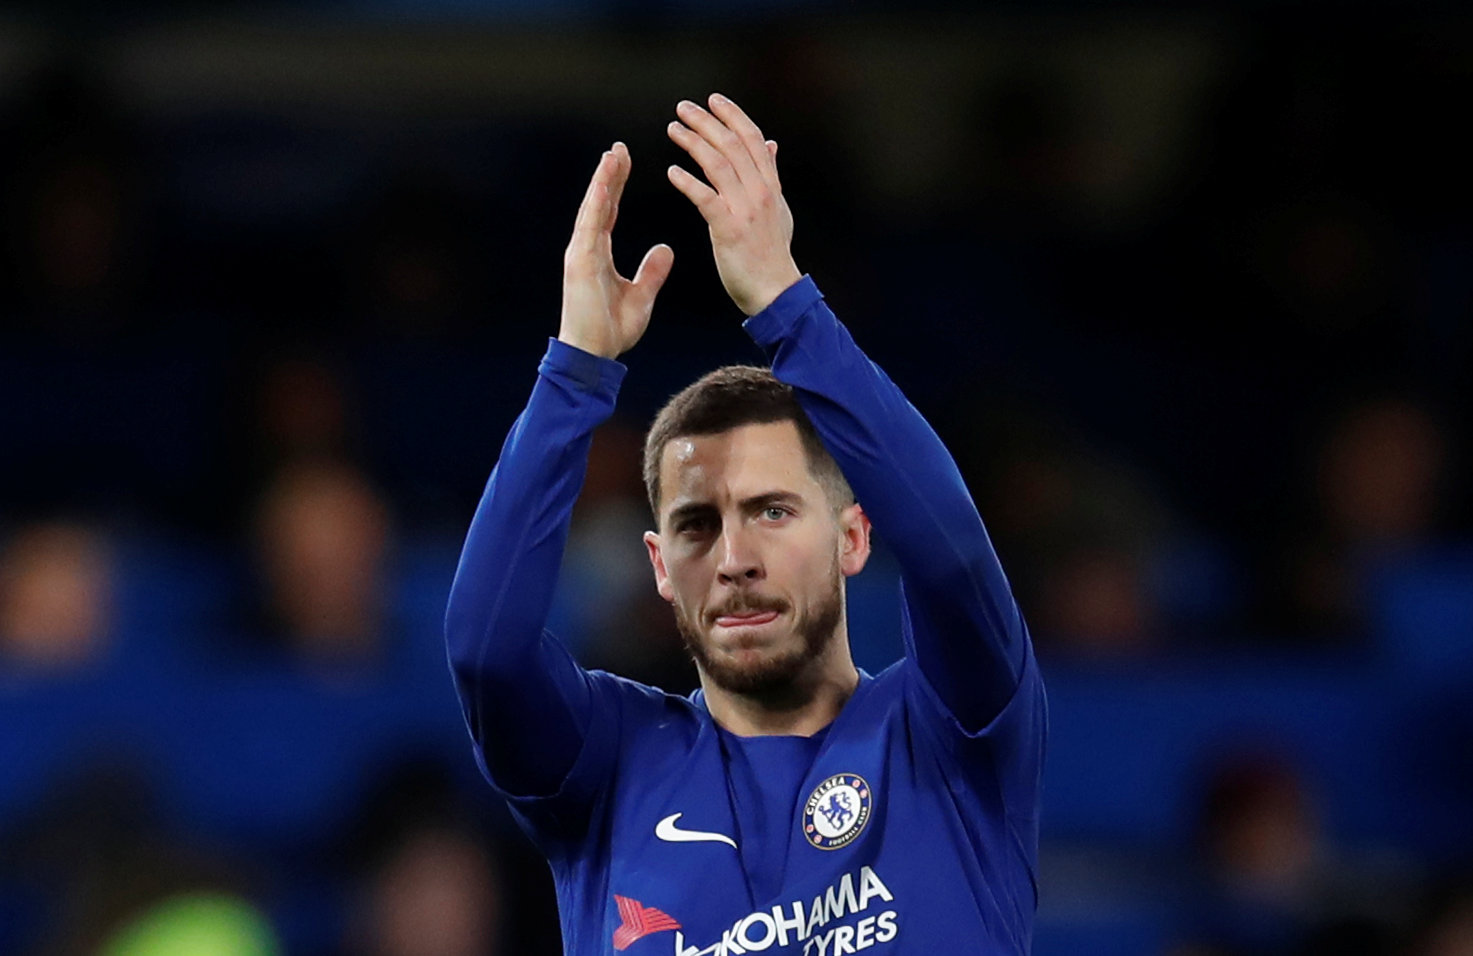 Chelsea 3-0 West Bromwich Albion: Three talking points from Stamford Bridge